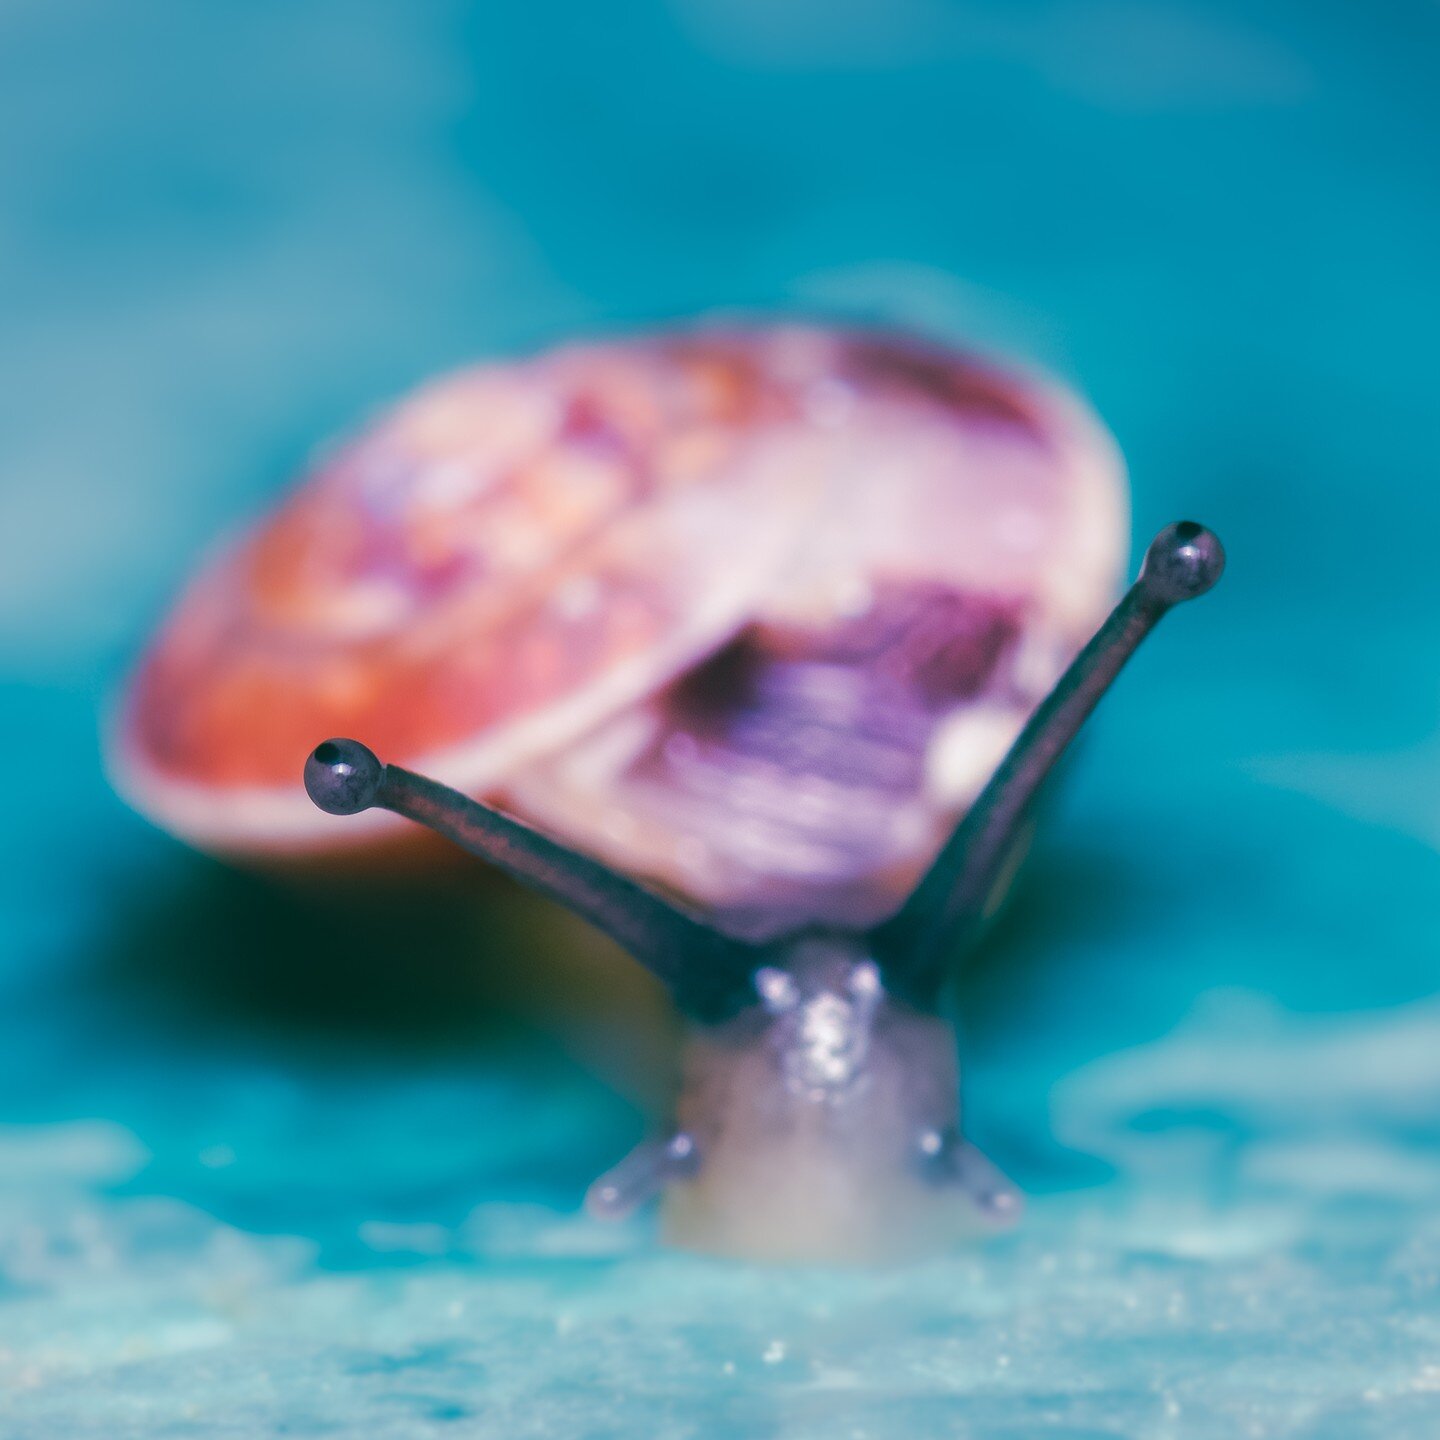 Silly Saturday pic of a little snail found &quot;booking it&quot; across a plastic cover of a box in the garden. Had a lot of fun messing with the colours for this one in lightroom.

#snail #macro #macrophoto #macrophotos #photomacro #macroholic #mac